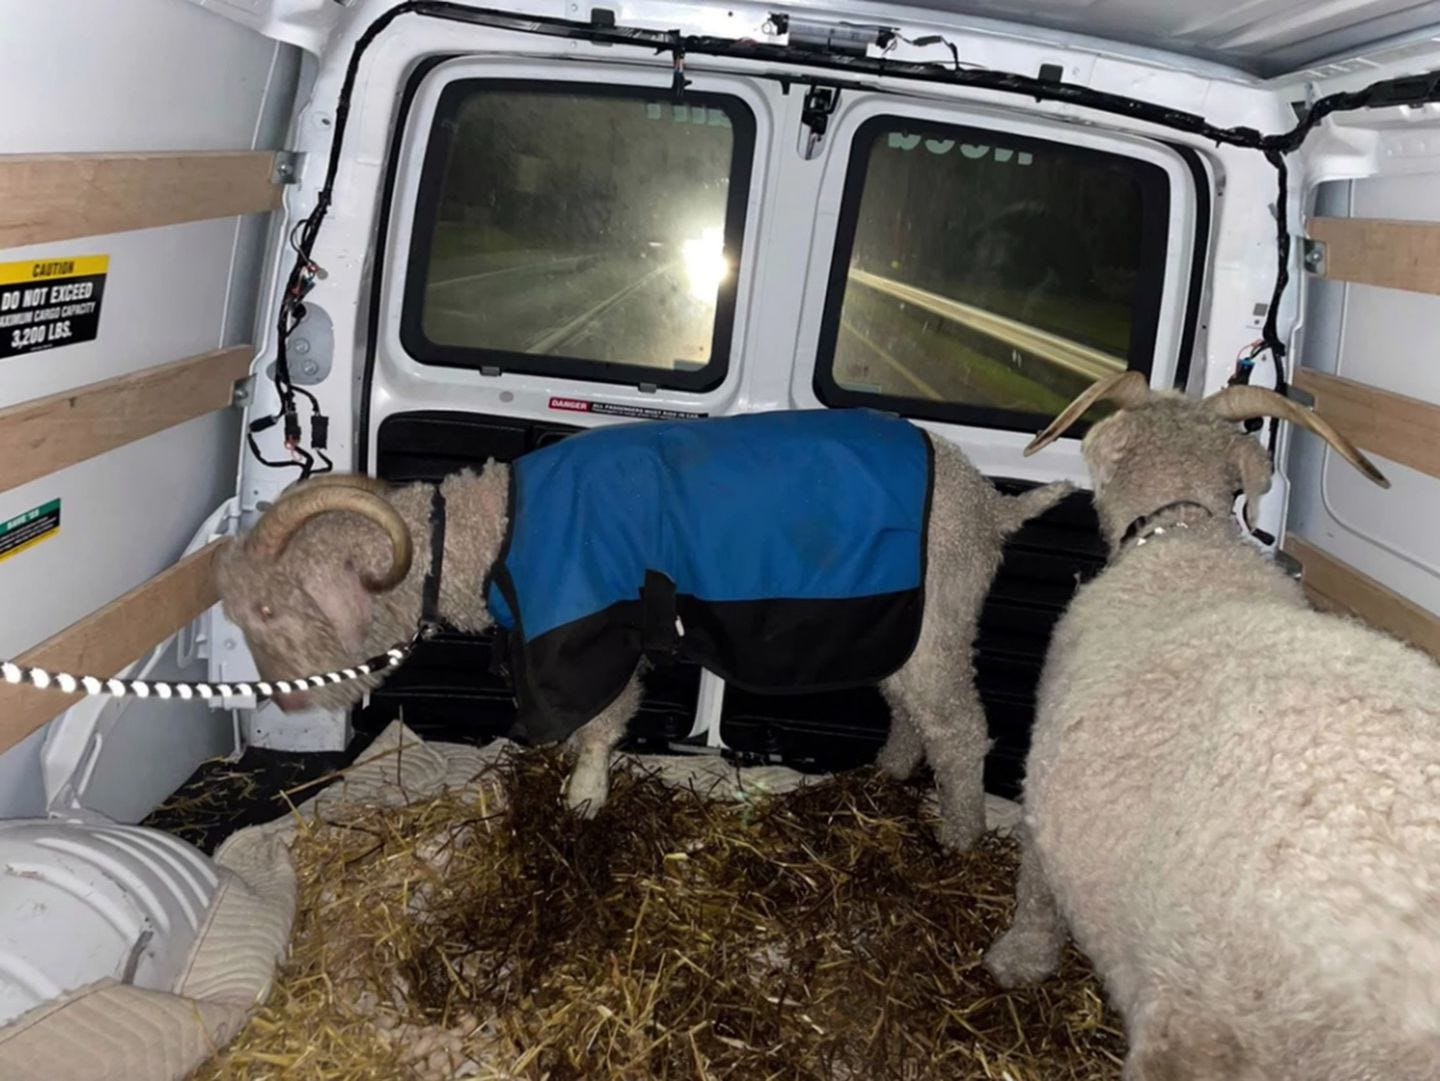 A photo provided by cadets from the United States Military Academy at West Point, N.Y., who refused to give their names, shows Bill No. 36, left, and Bill No. 37, two goat mascots of the US Naval Academy in Annapolis, Md., in transit to West Point after their goatnapping on Saturday night, Nov. 27, 2021.